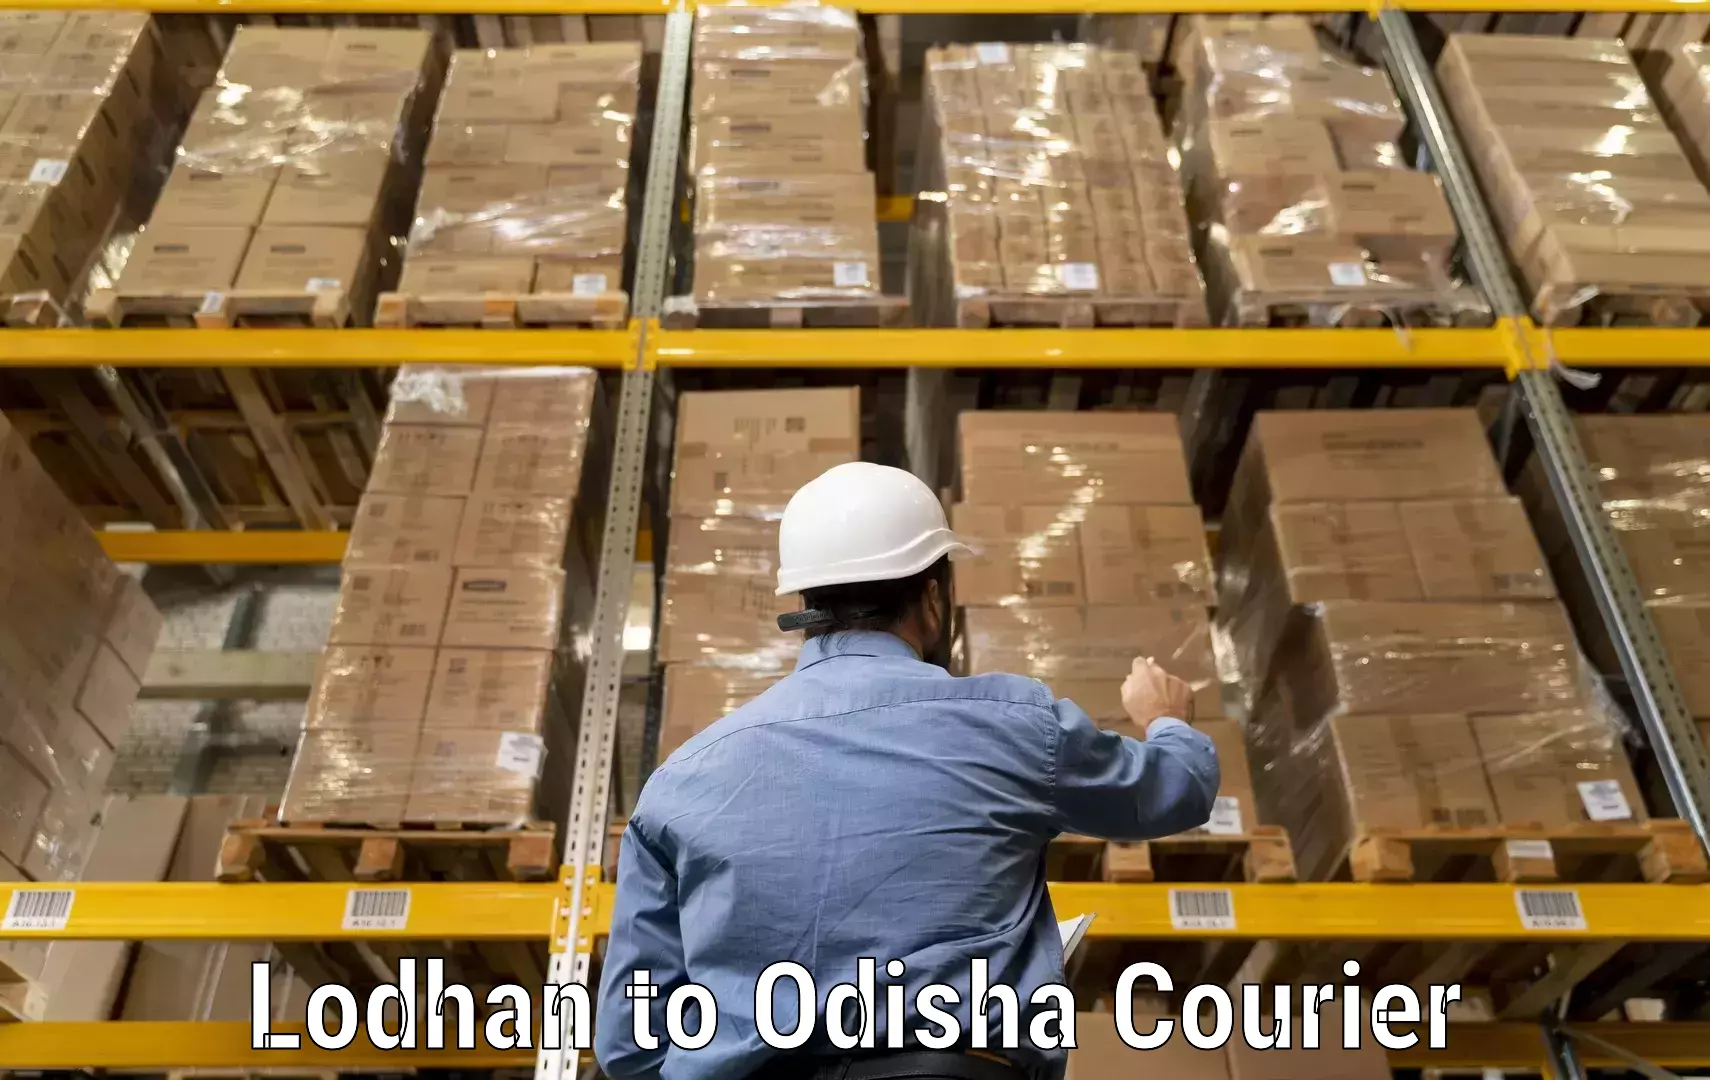 Integrated shipping services Lodhan to Odisha